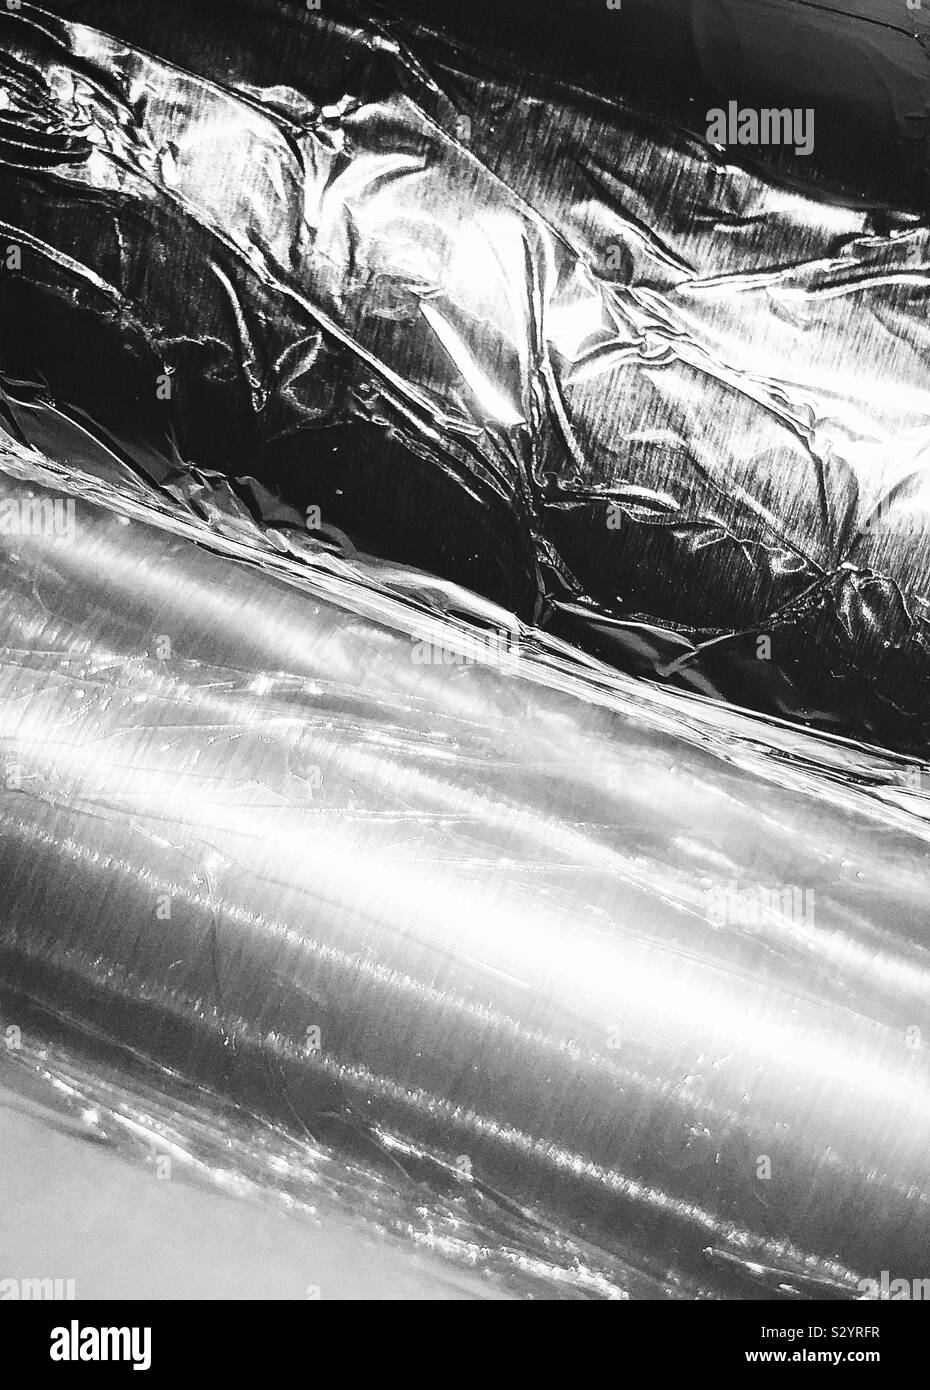 https://c8.alamy.com/comp/S2YRFR/closeup-photo-in-black-and-white-of-kitchen-foil-and-cling-film-on-rolls-S2YRFR.jpg